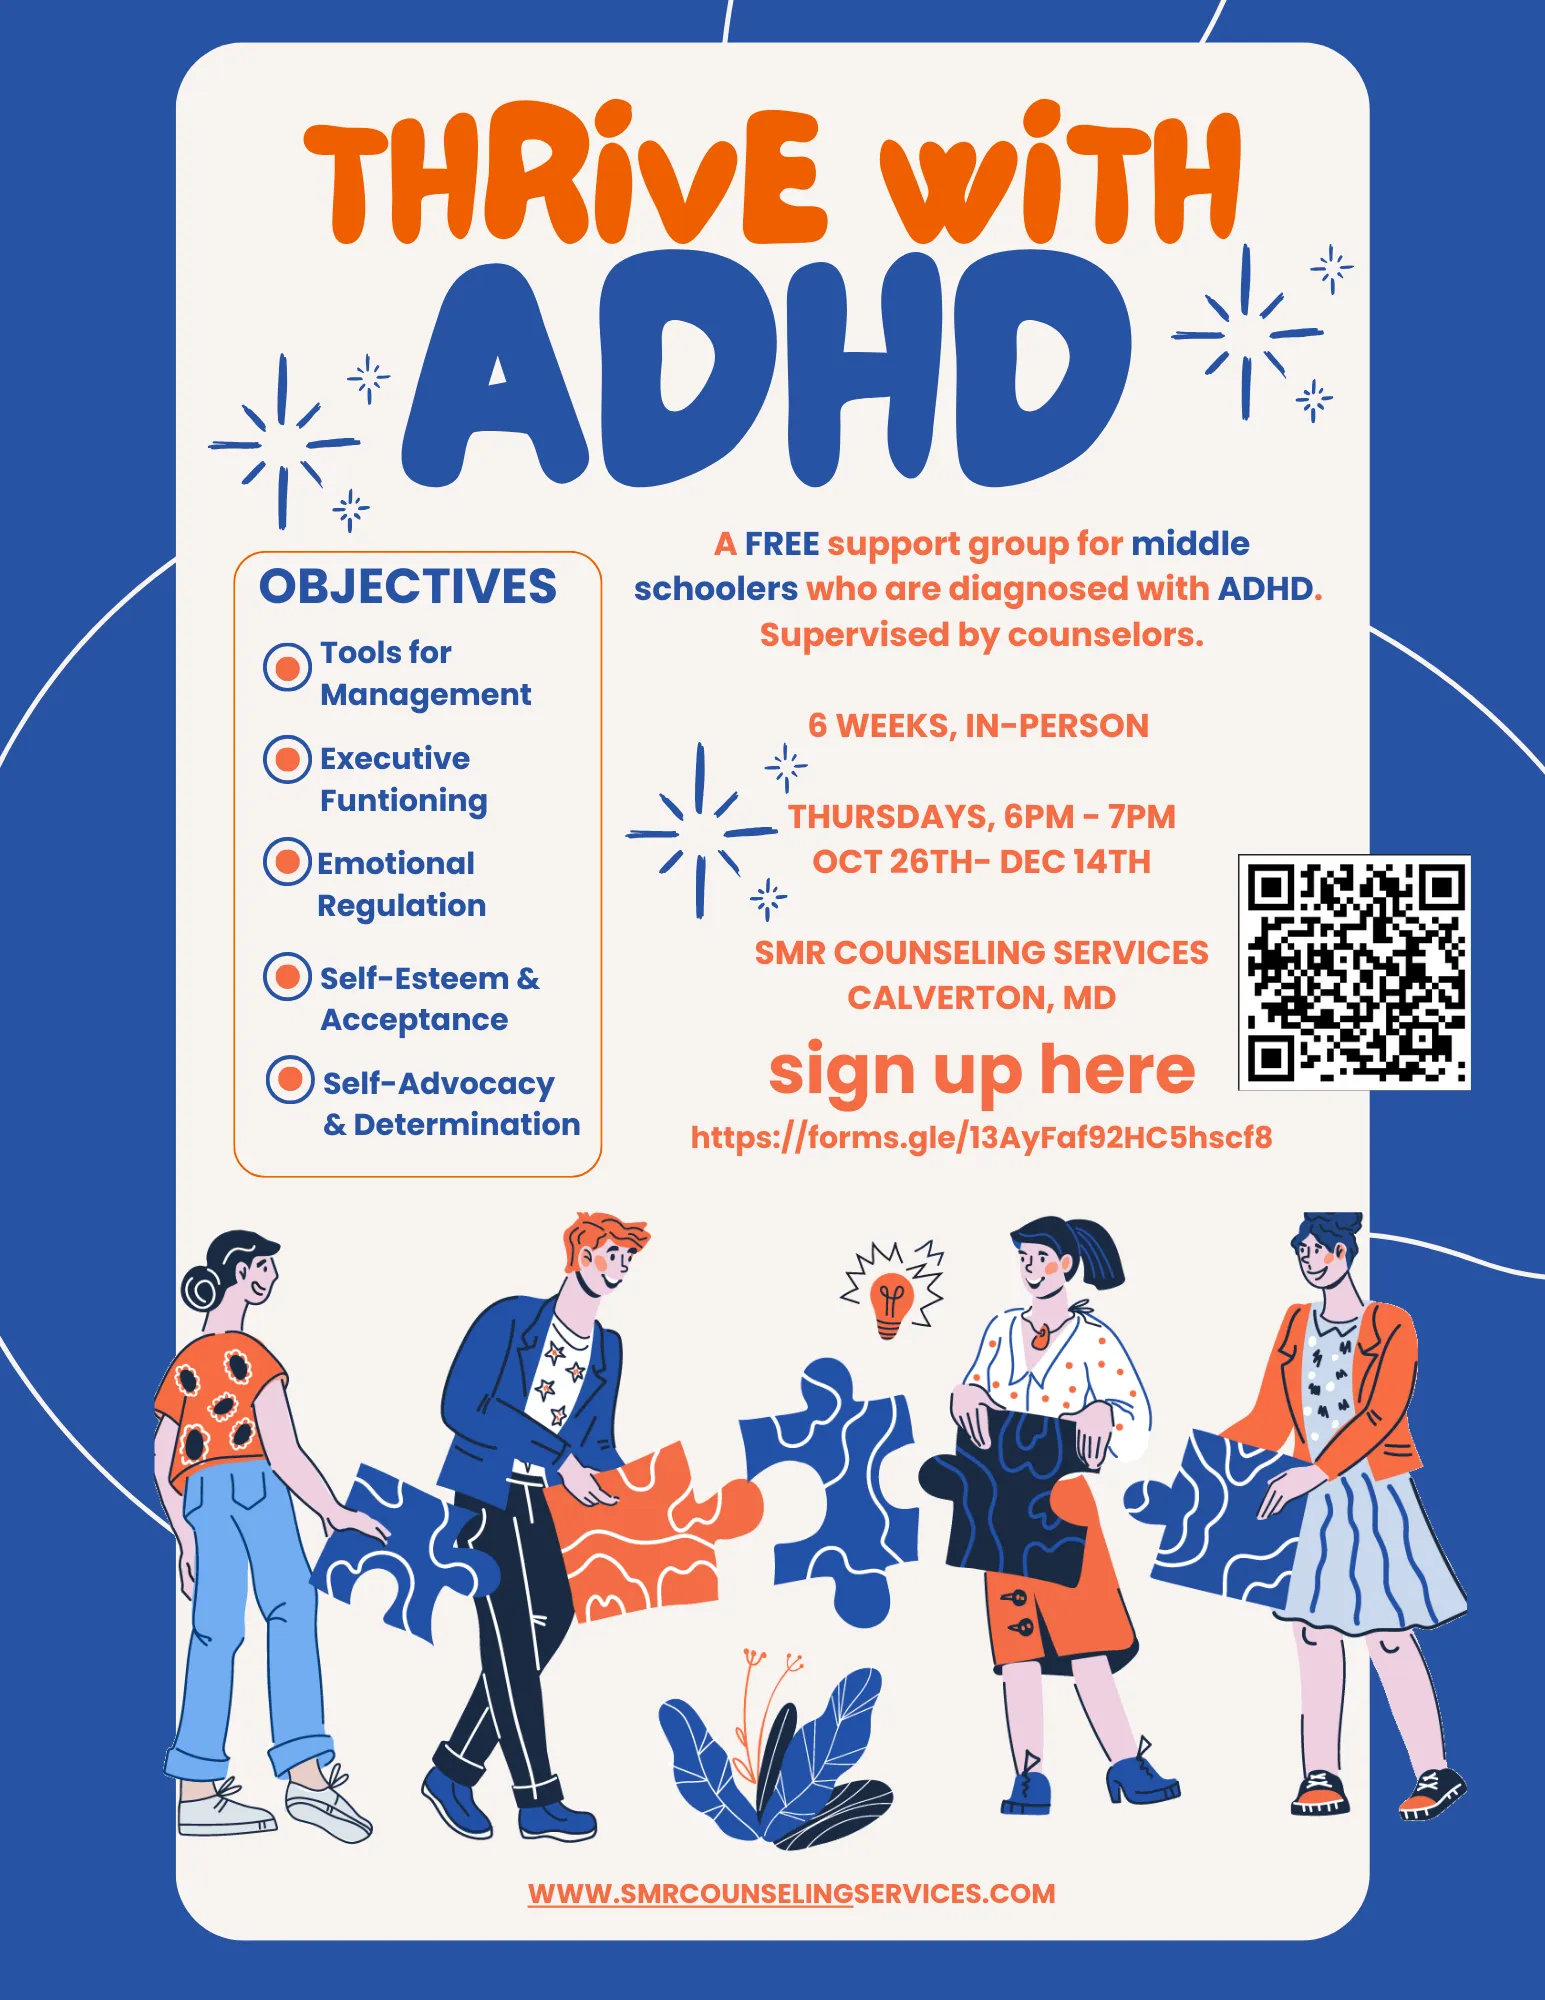 Thrive with ADHD